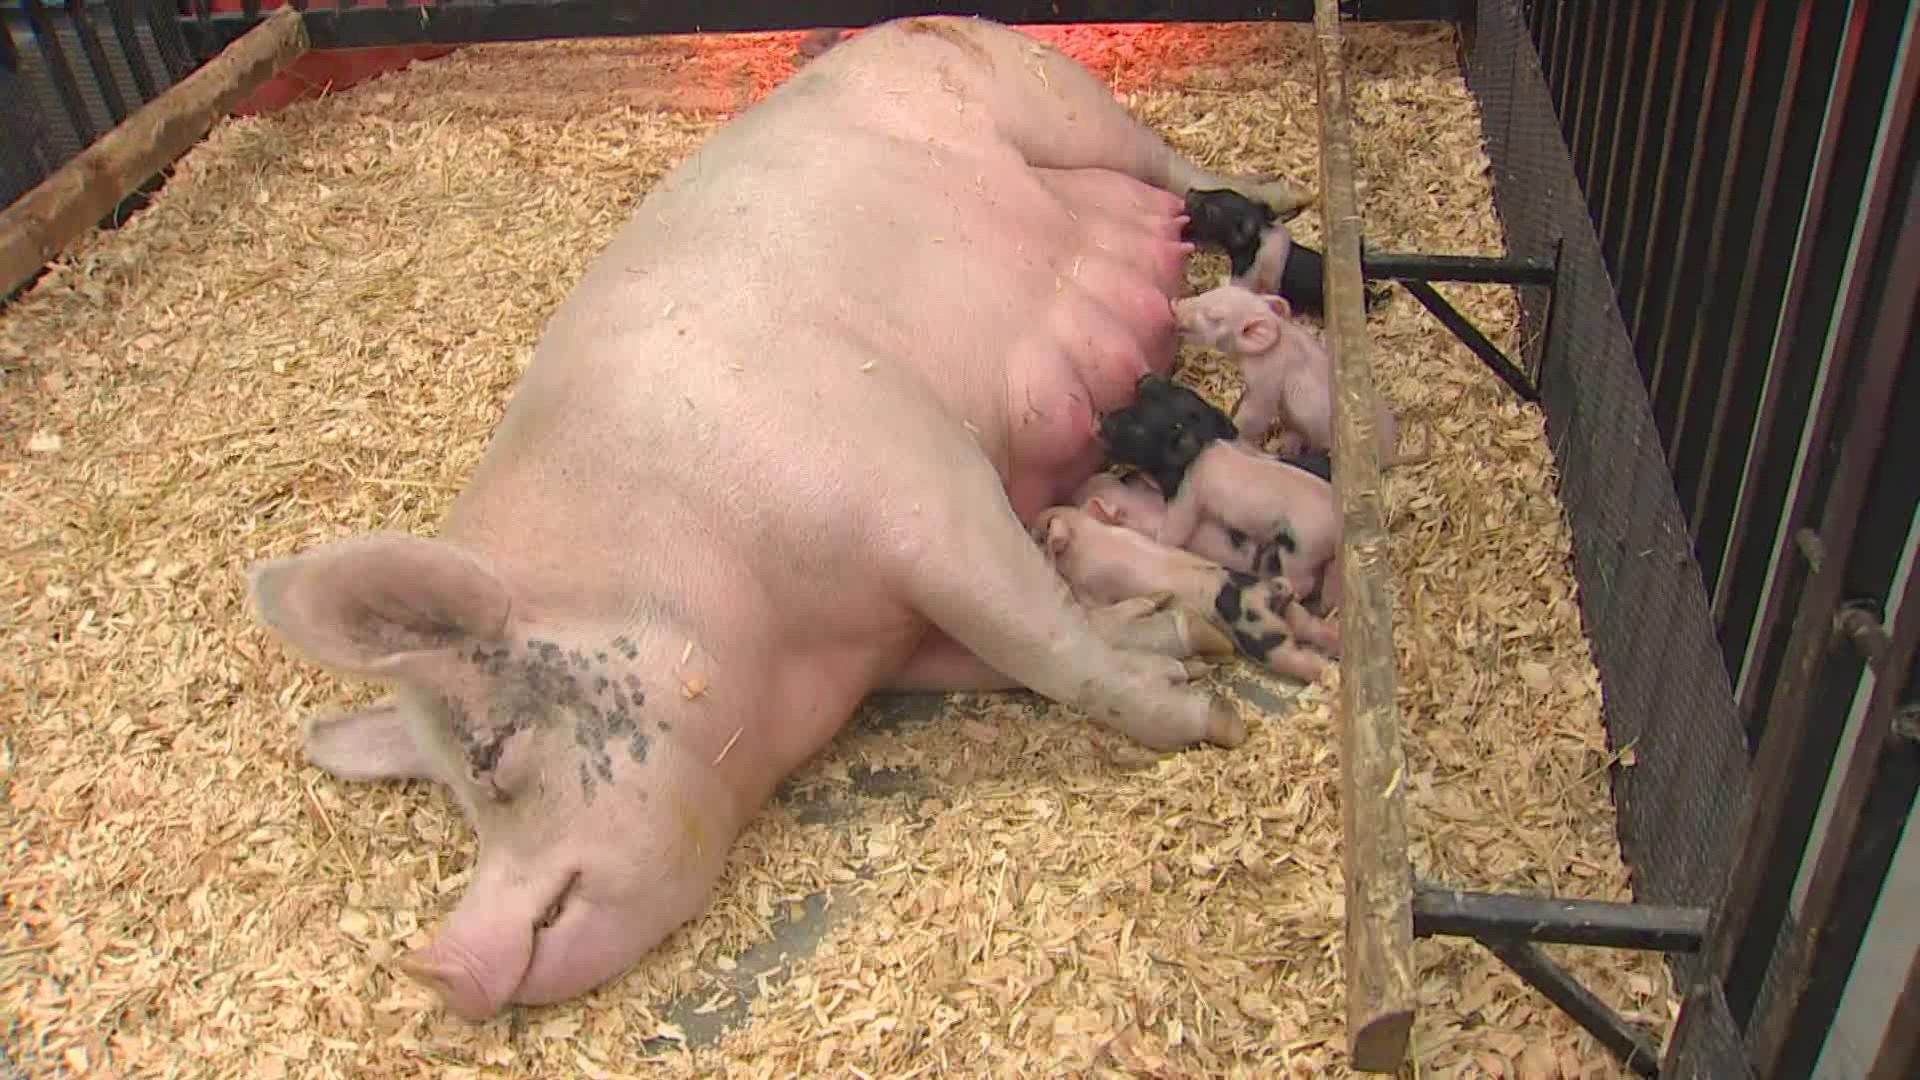 The mother pig gave birth to eight piglets overnight Thursday into Friday at the Washington State Fair. People can come view the new piglets at the fair.